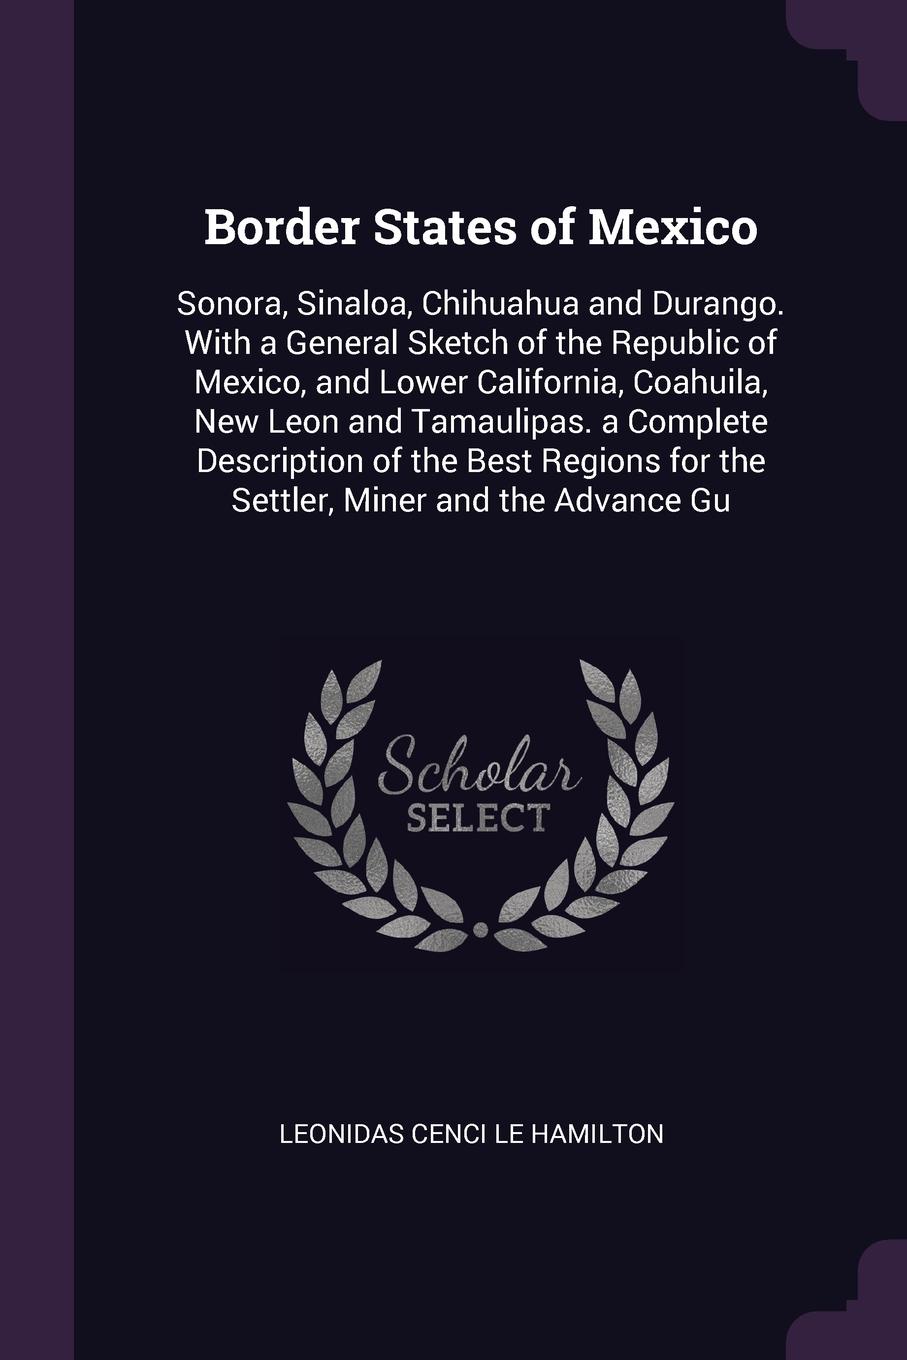 Border States of Mexico. Sonora, Sinaloa, Chihuahua and Durango. With a General Sketch of the Republic of Mexico, and Lower California, Coahuila, New Leon and Tamaulipas. a Complete Description of the Best Regions for the Settler, Miner and the Ad...